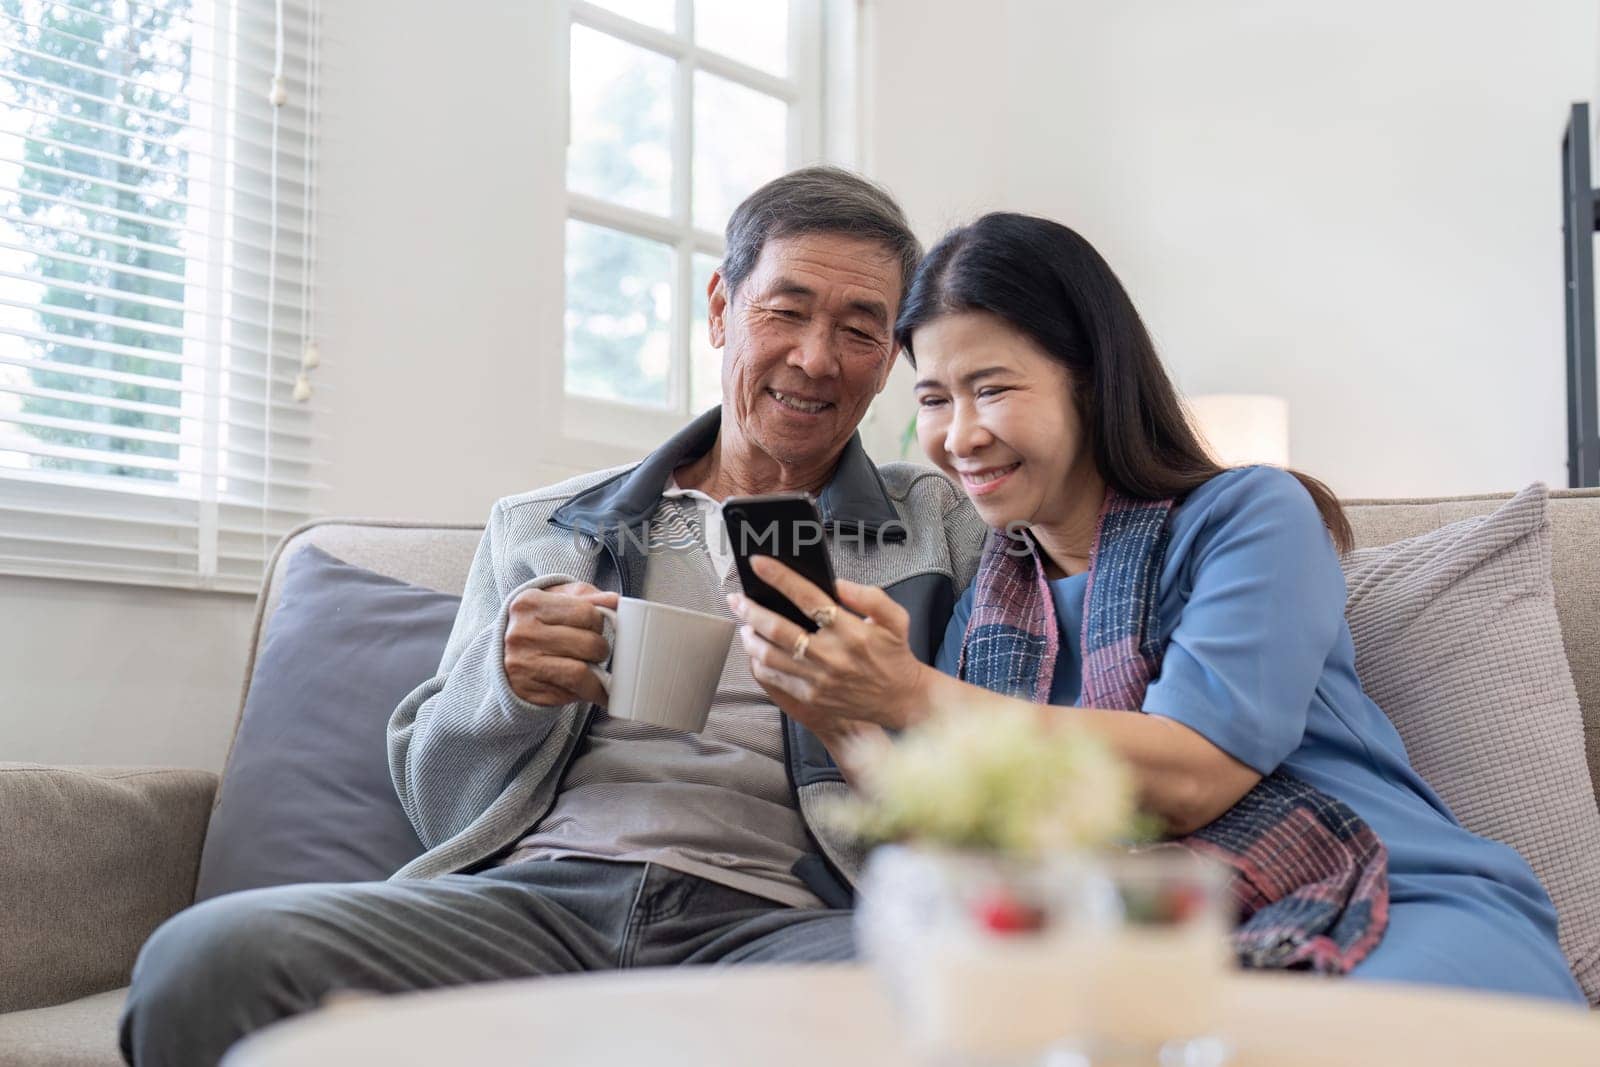 Happy elderly couple sitting on a couch, using a smartphone for shopping and social media, showcasing the joy of modern technology.